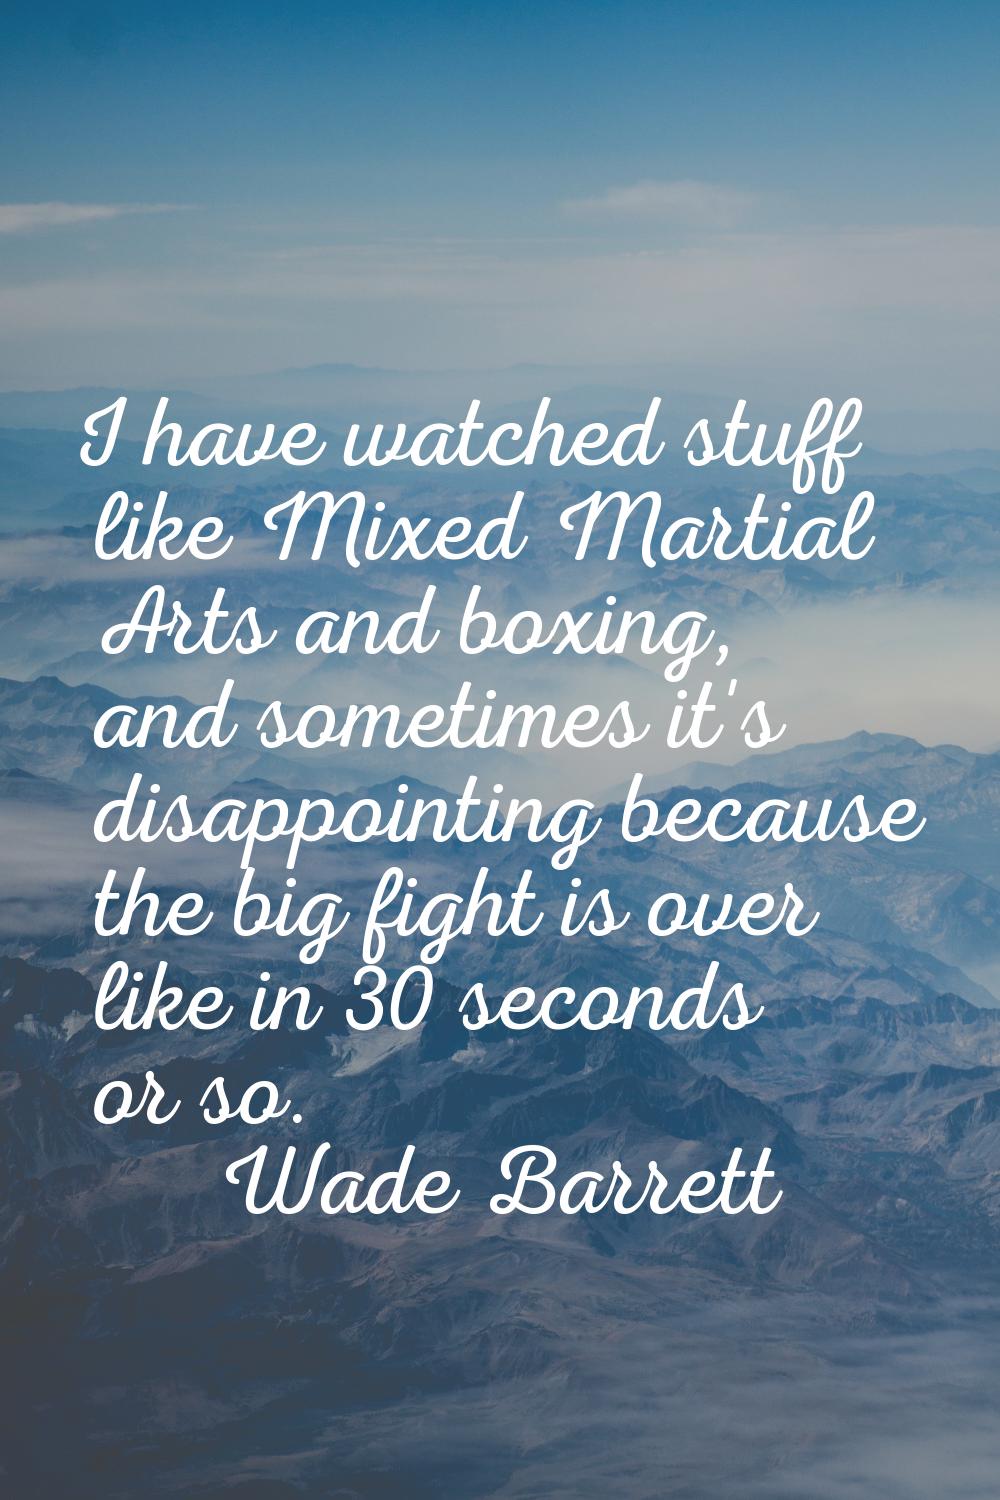 I have watched stuff like Mixed Martial Arts and boxing, and sometimes it's disappointing because t